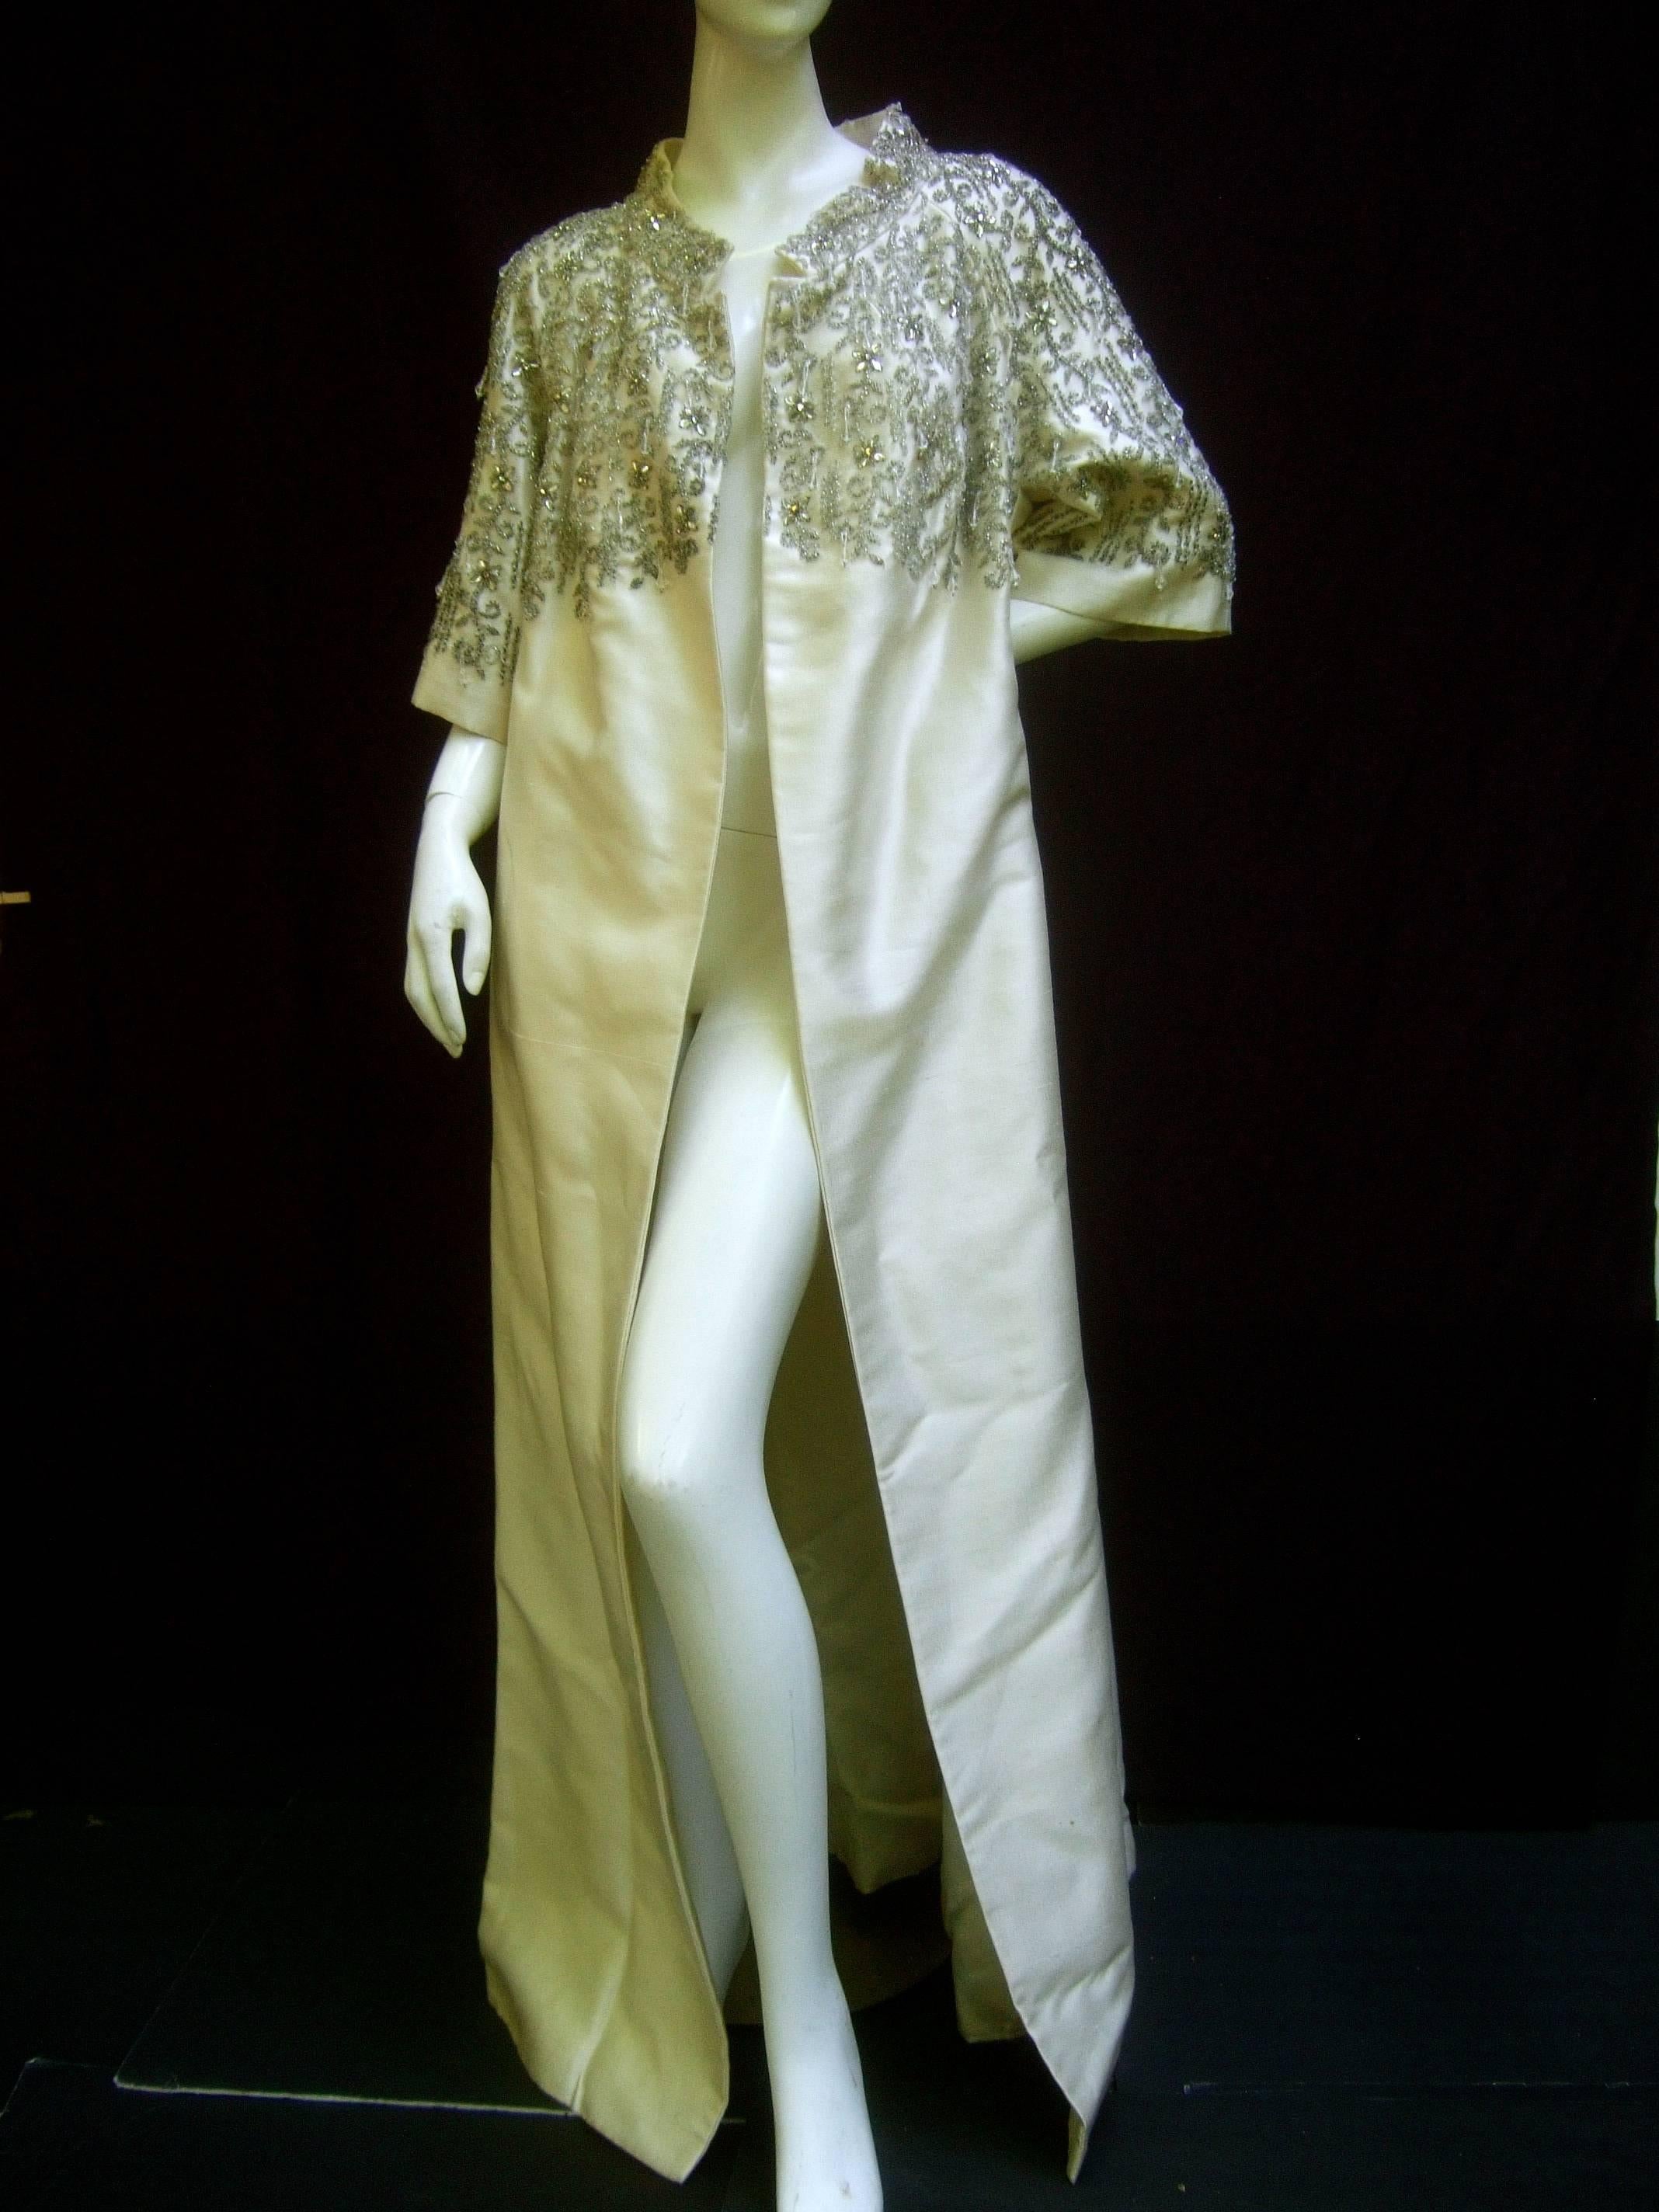 Exquisite oyster silk shantung crystal beaded opera coat c 1960
The lavish ivory silk beaded evening coat is encrusted with 
intricate clusters of glass beads and glittering crystals 

The ornate beading embellishes the bodice, Nehru collar
and